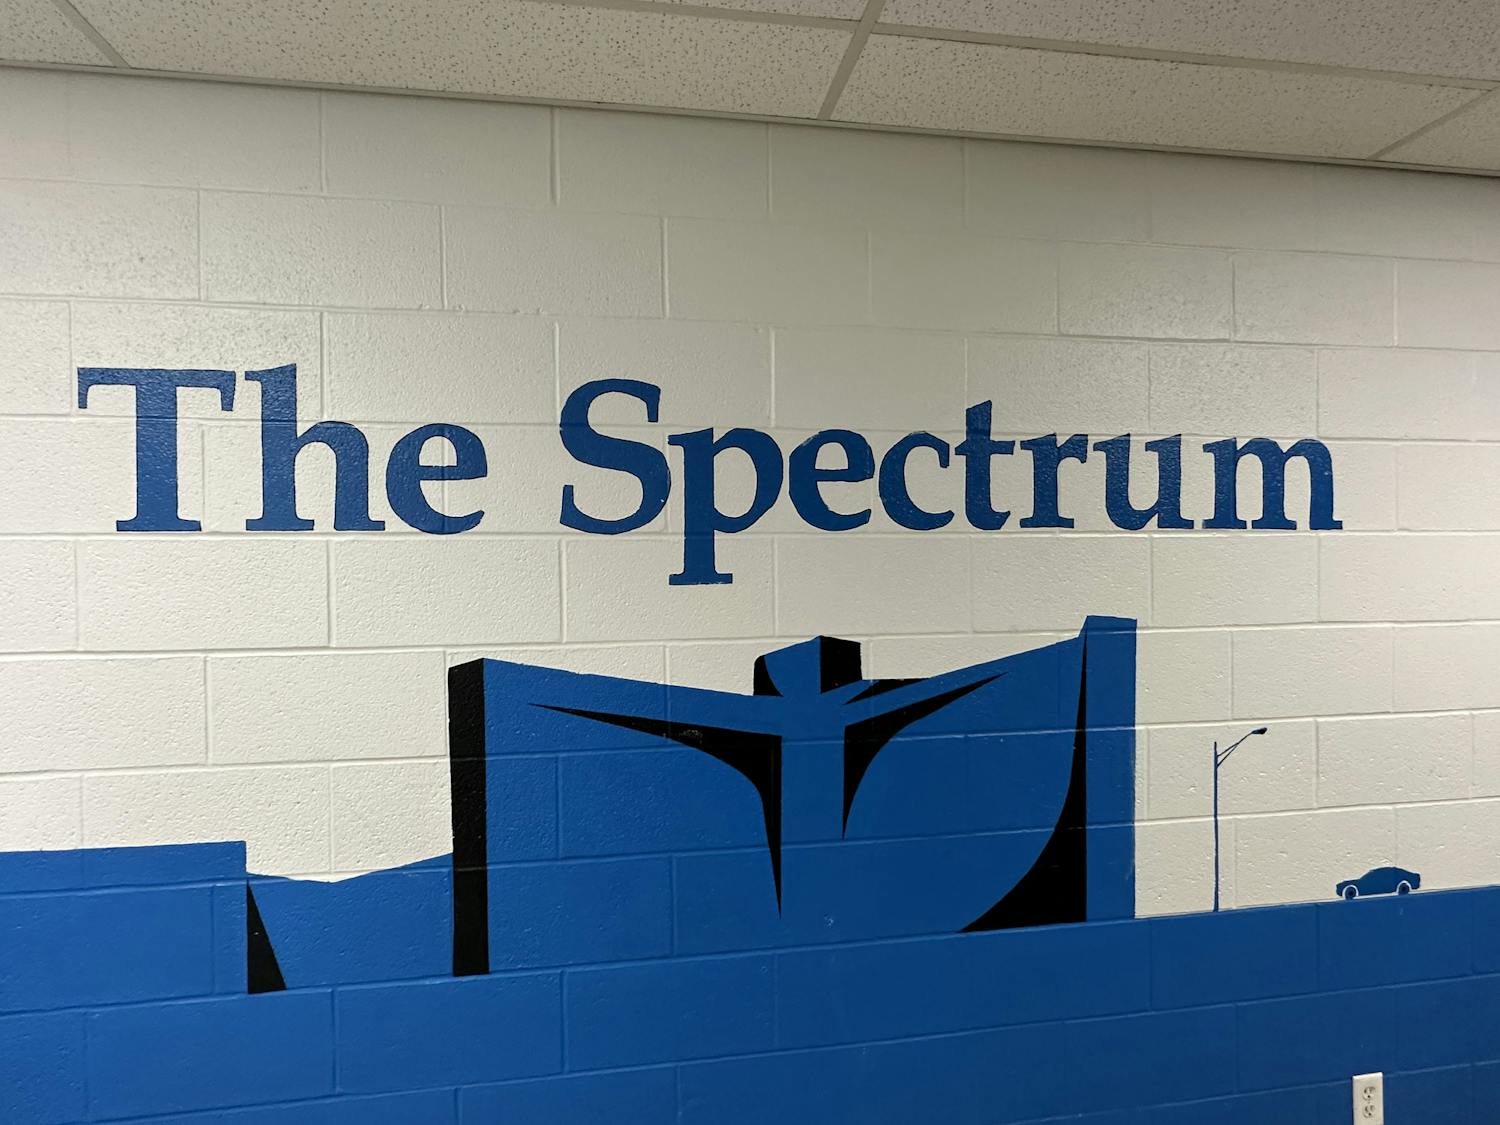 The Spectrum was founded in 1950 as the University at Buffalo's independent student-run news publication.